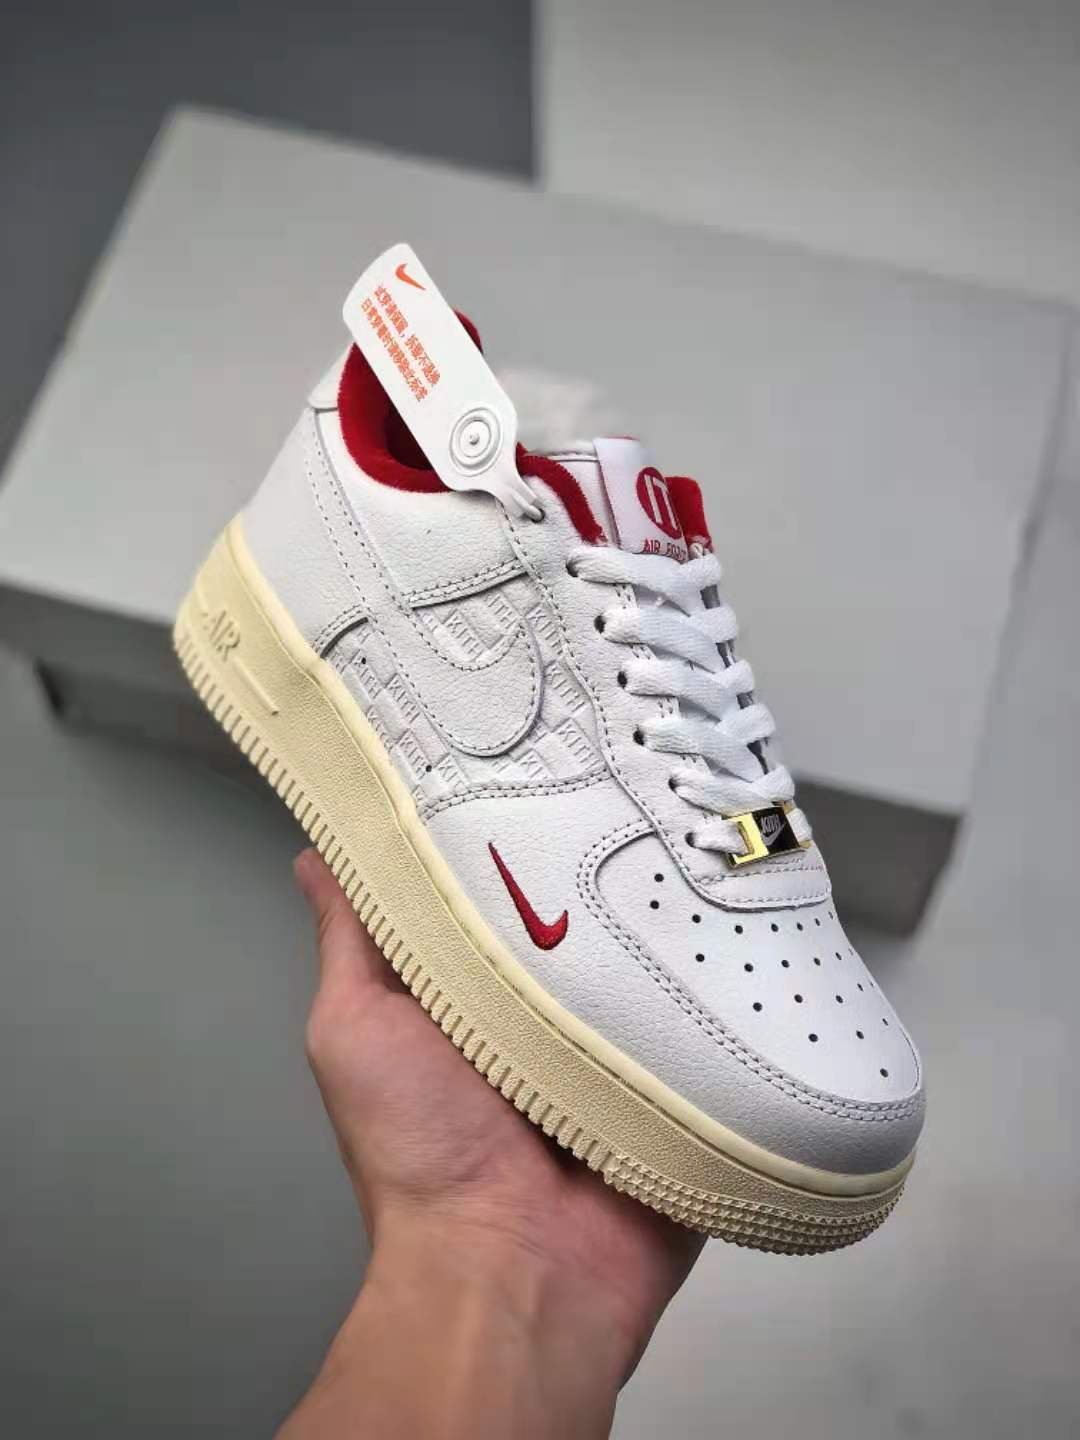 Nike KITH x Air Force 1 Low 'Tokyo' CZ7926-100 - Limited Edition Collaboration Footwear